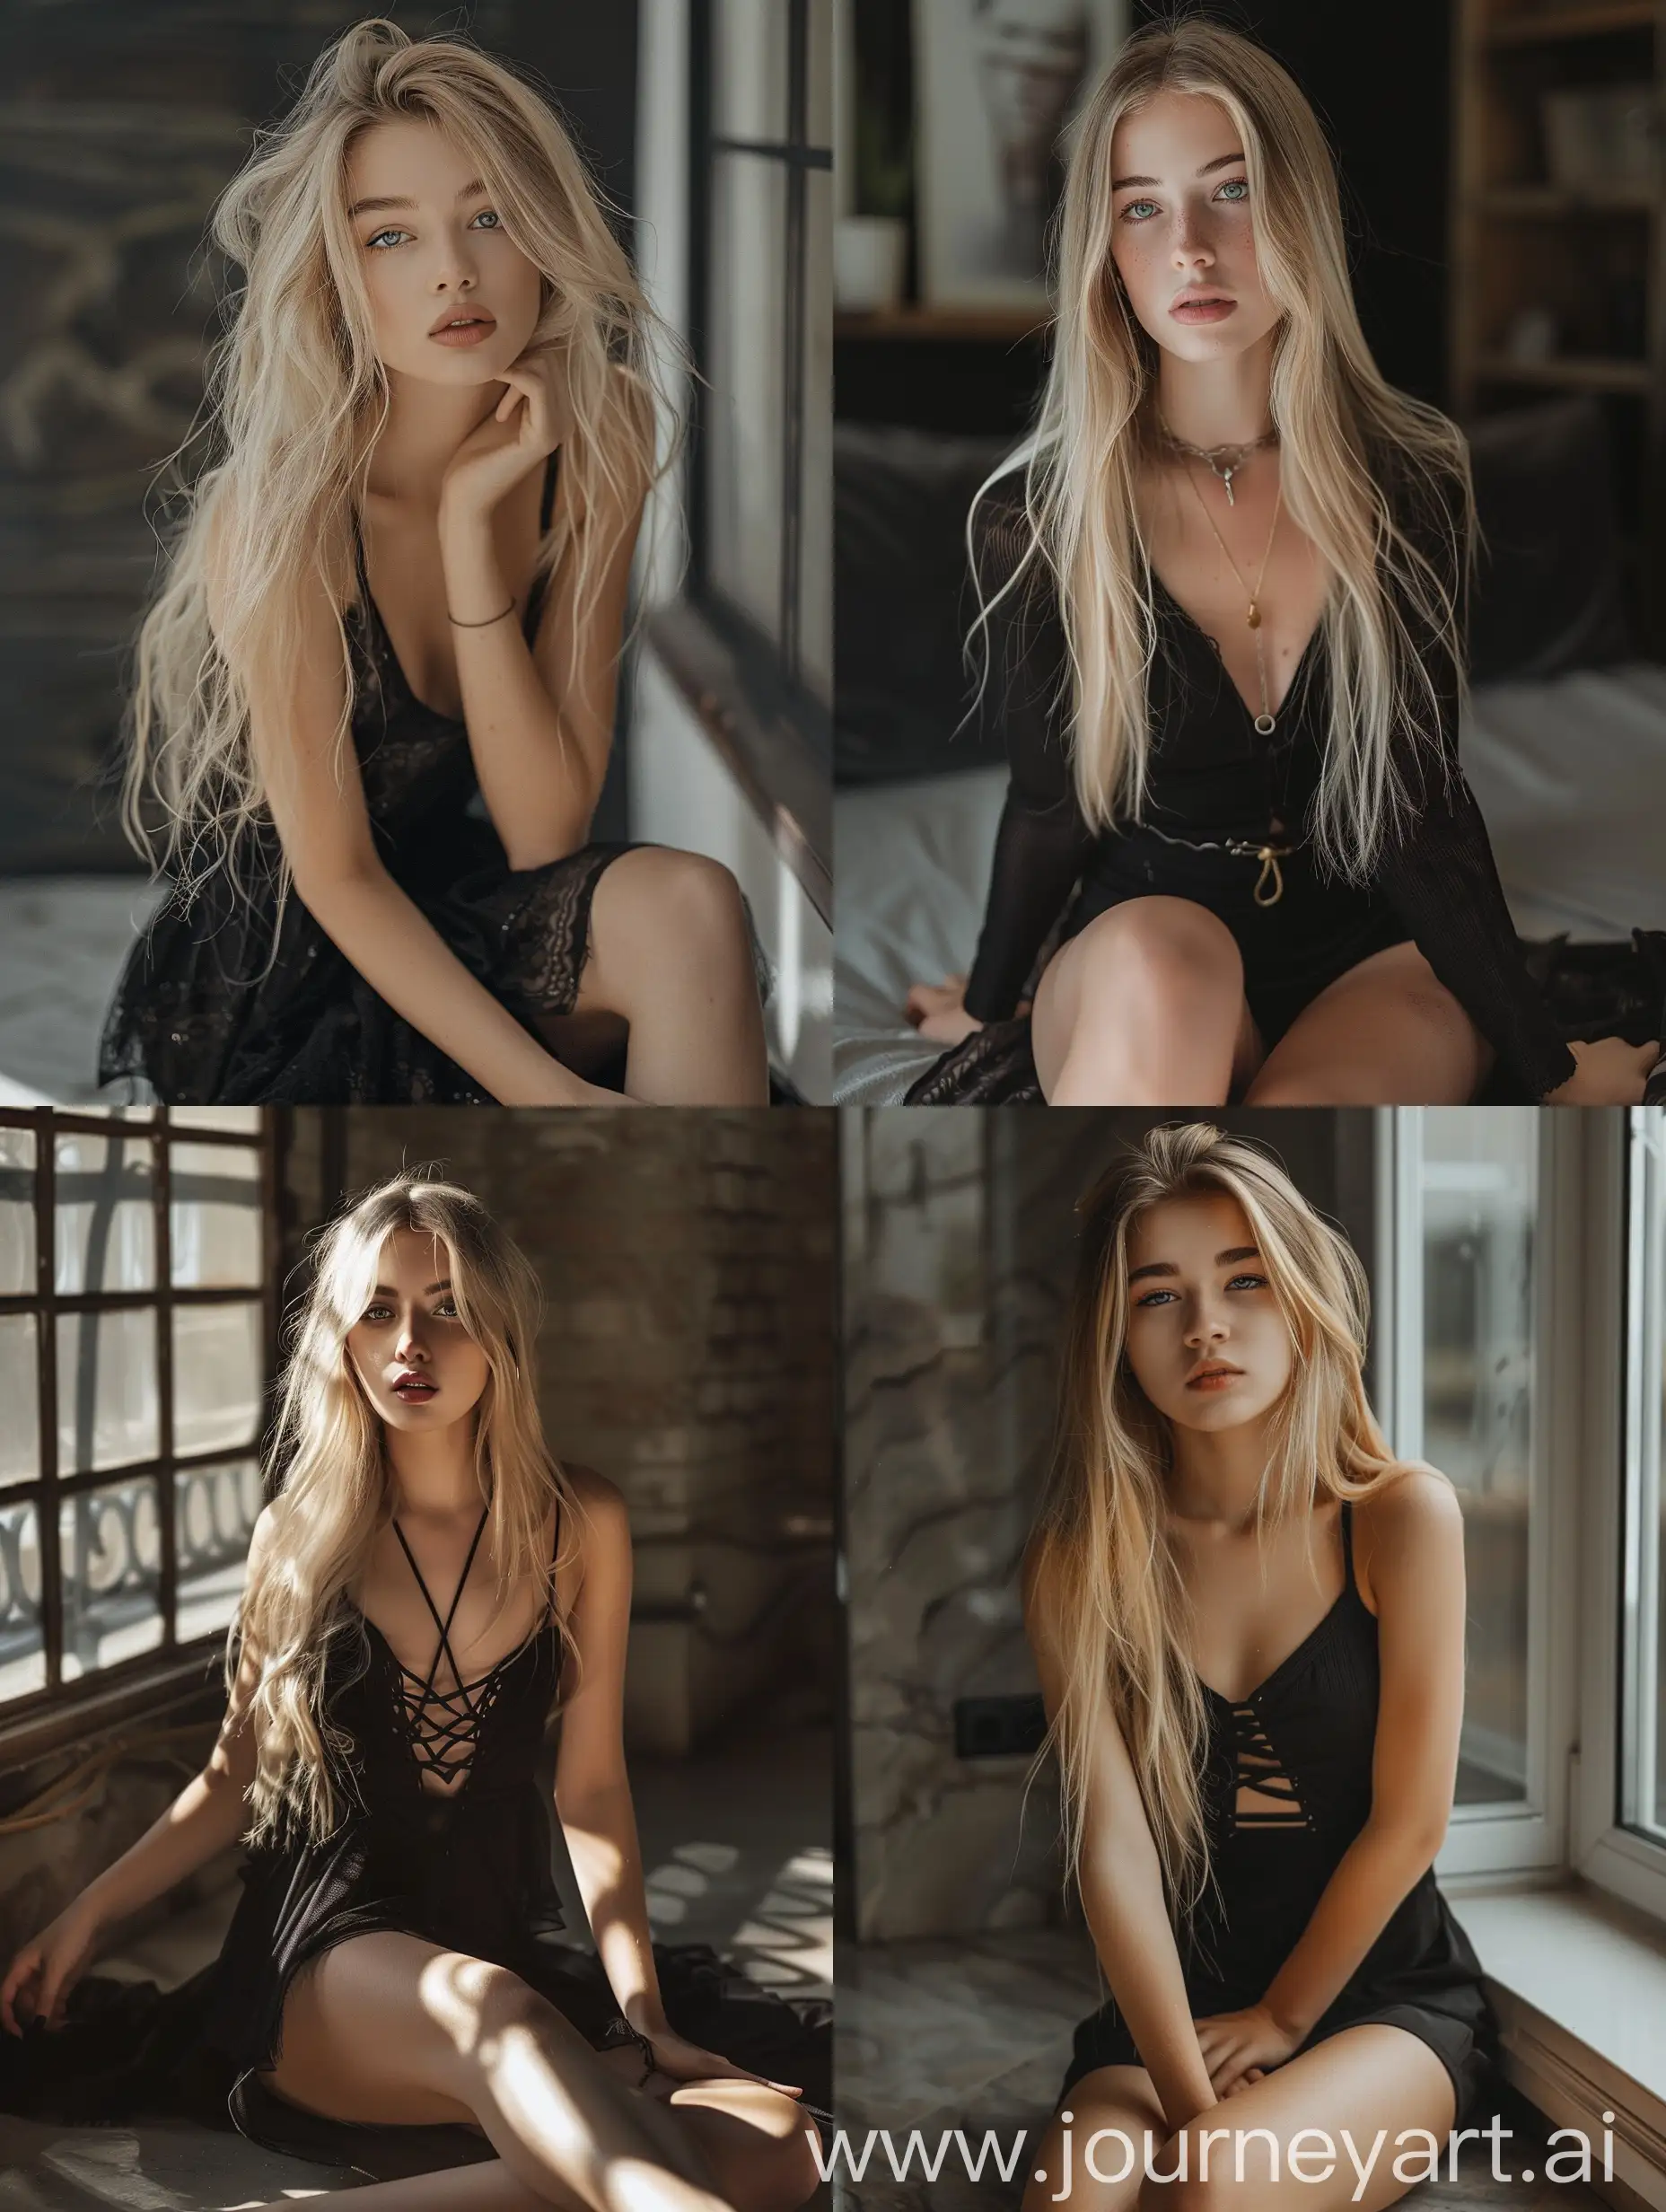 1 girl, long blond hair, 18 years old, influencer, beauty,   in the school, black dress, makeup, , fullbody, fitness, sitting,